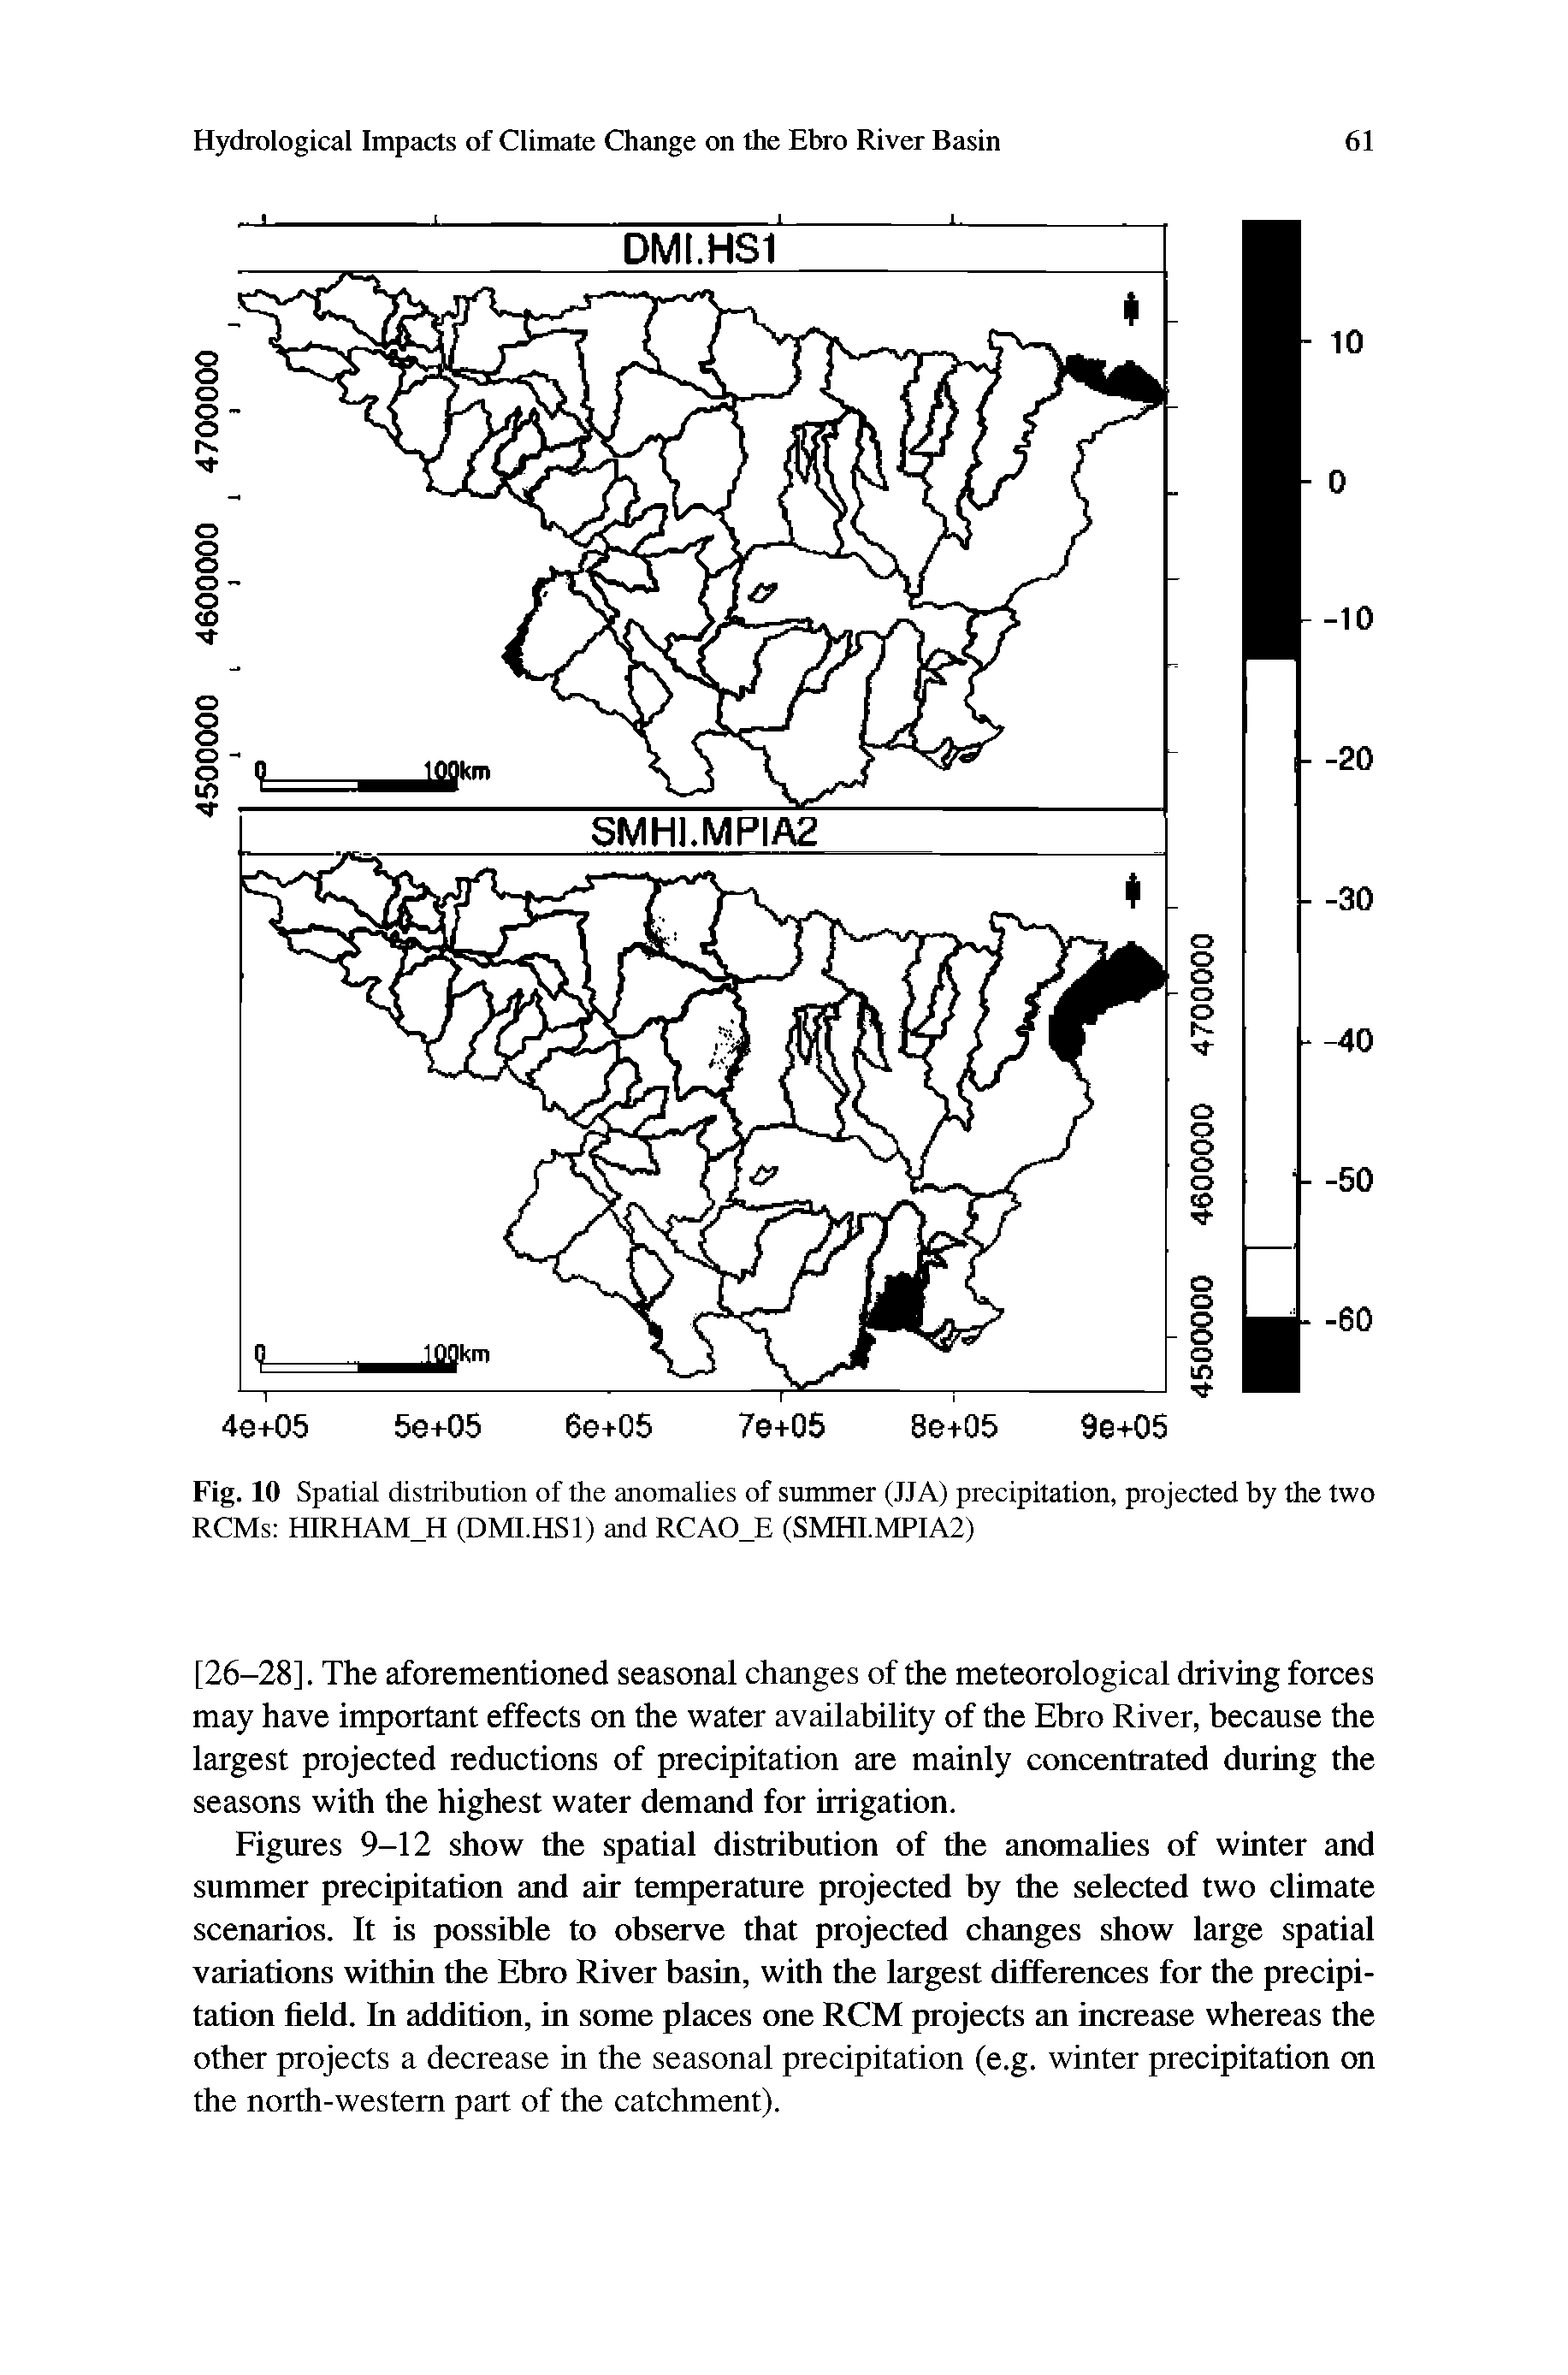 Figures 9-12 show the spatial distribution of the anomalies of winter and summer precipitation and air temperature projected by the selected two climate scenarios. It is possible to observe that projected changes show large spatial variations within the Ebro River basin, with the largest differences for the precipitation field. In addition, in some places one RCM projects an increase whereas the other projects a decrease in the seasonal precipitation (e.g. winter precipitation on the north-western part of the catchment).